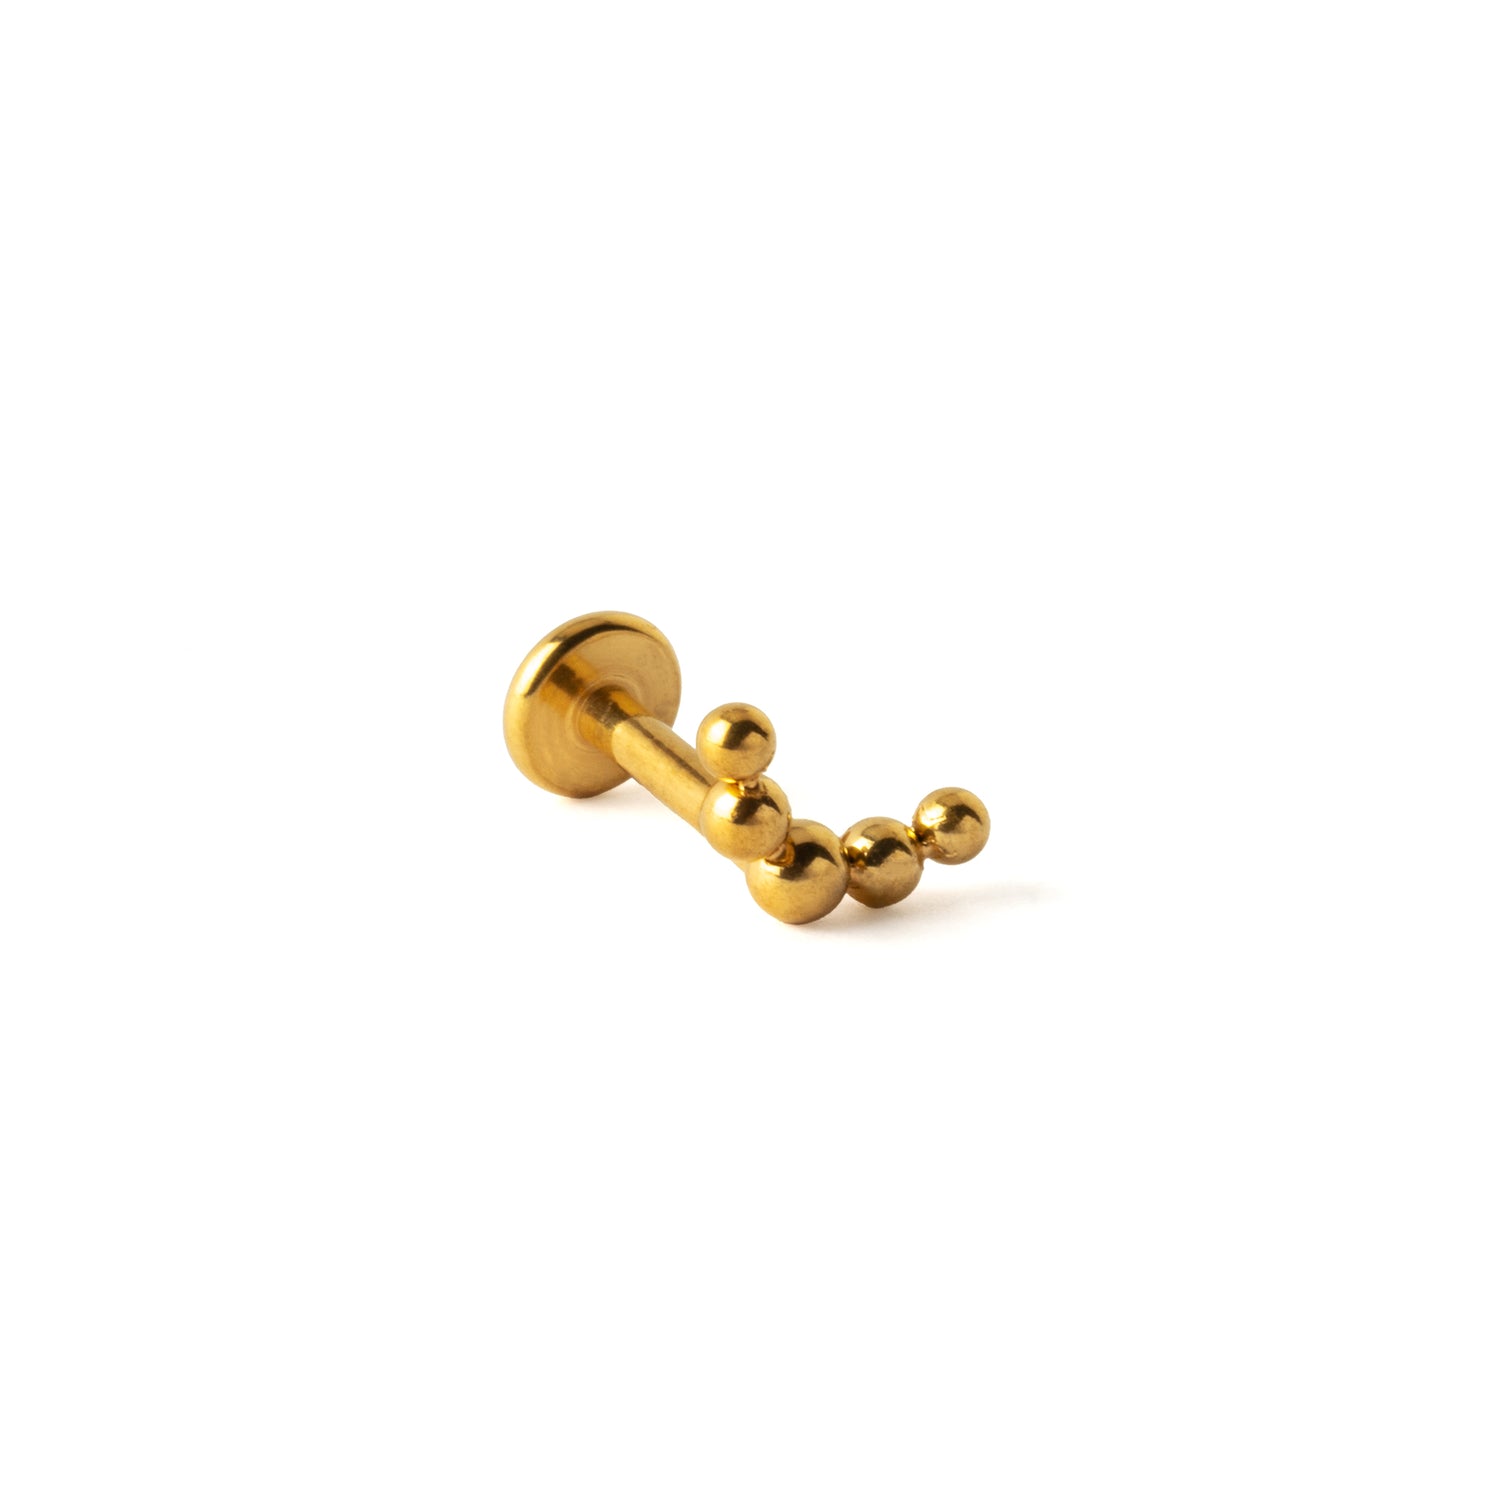 Almora Golden Labret right side view